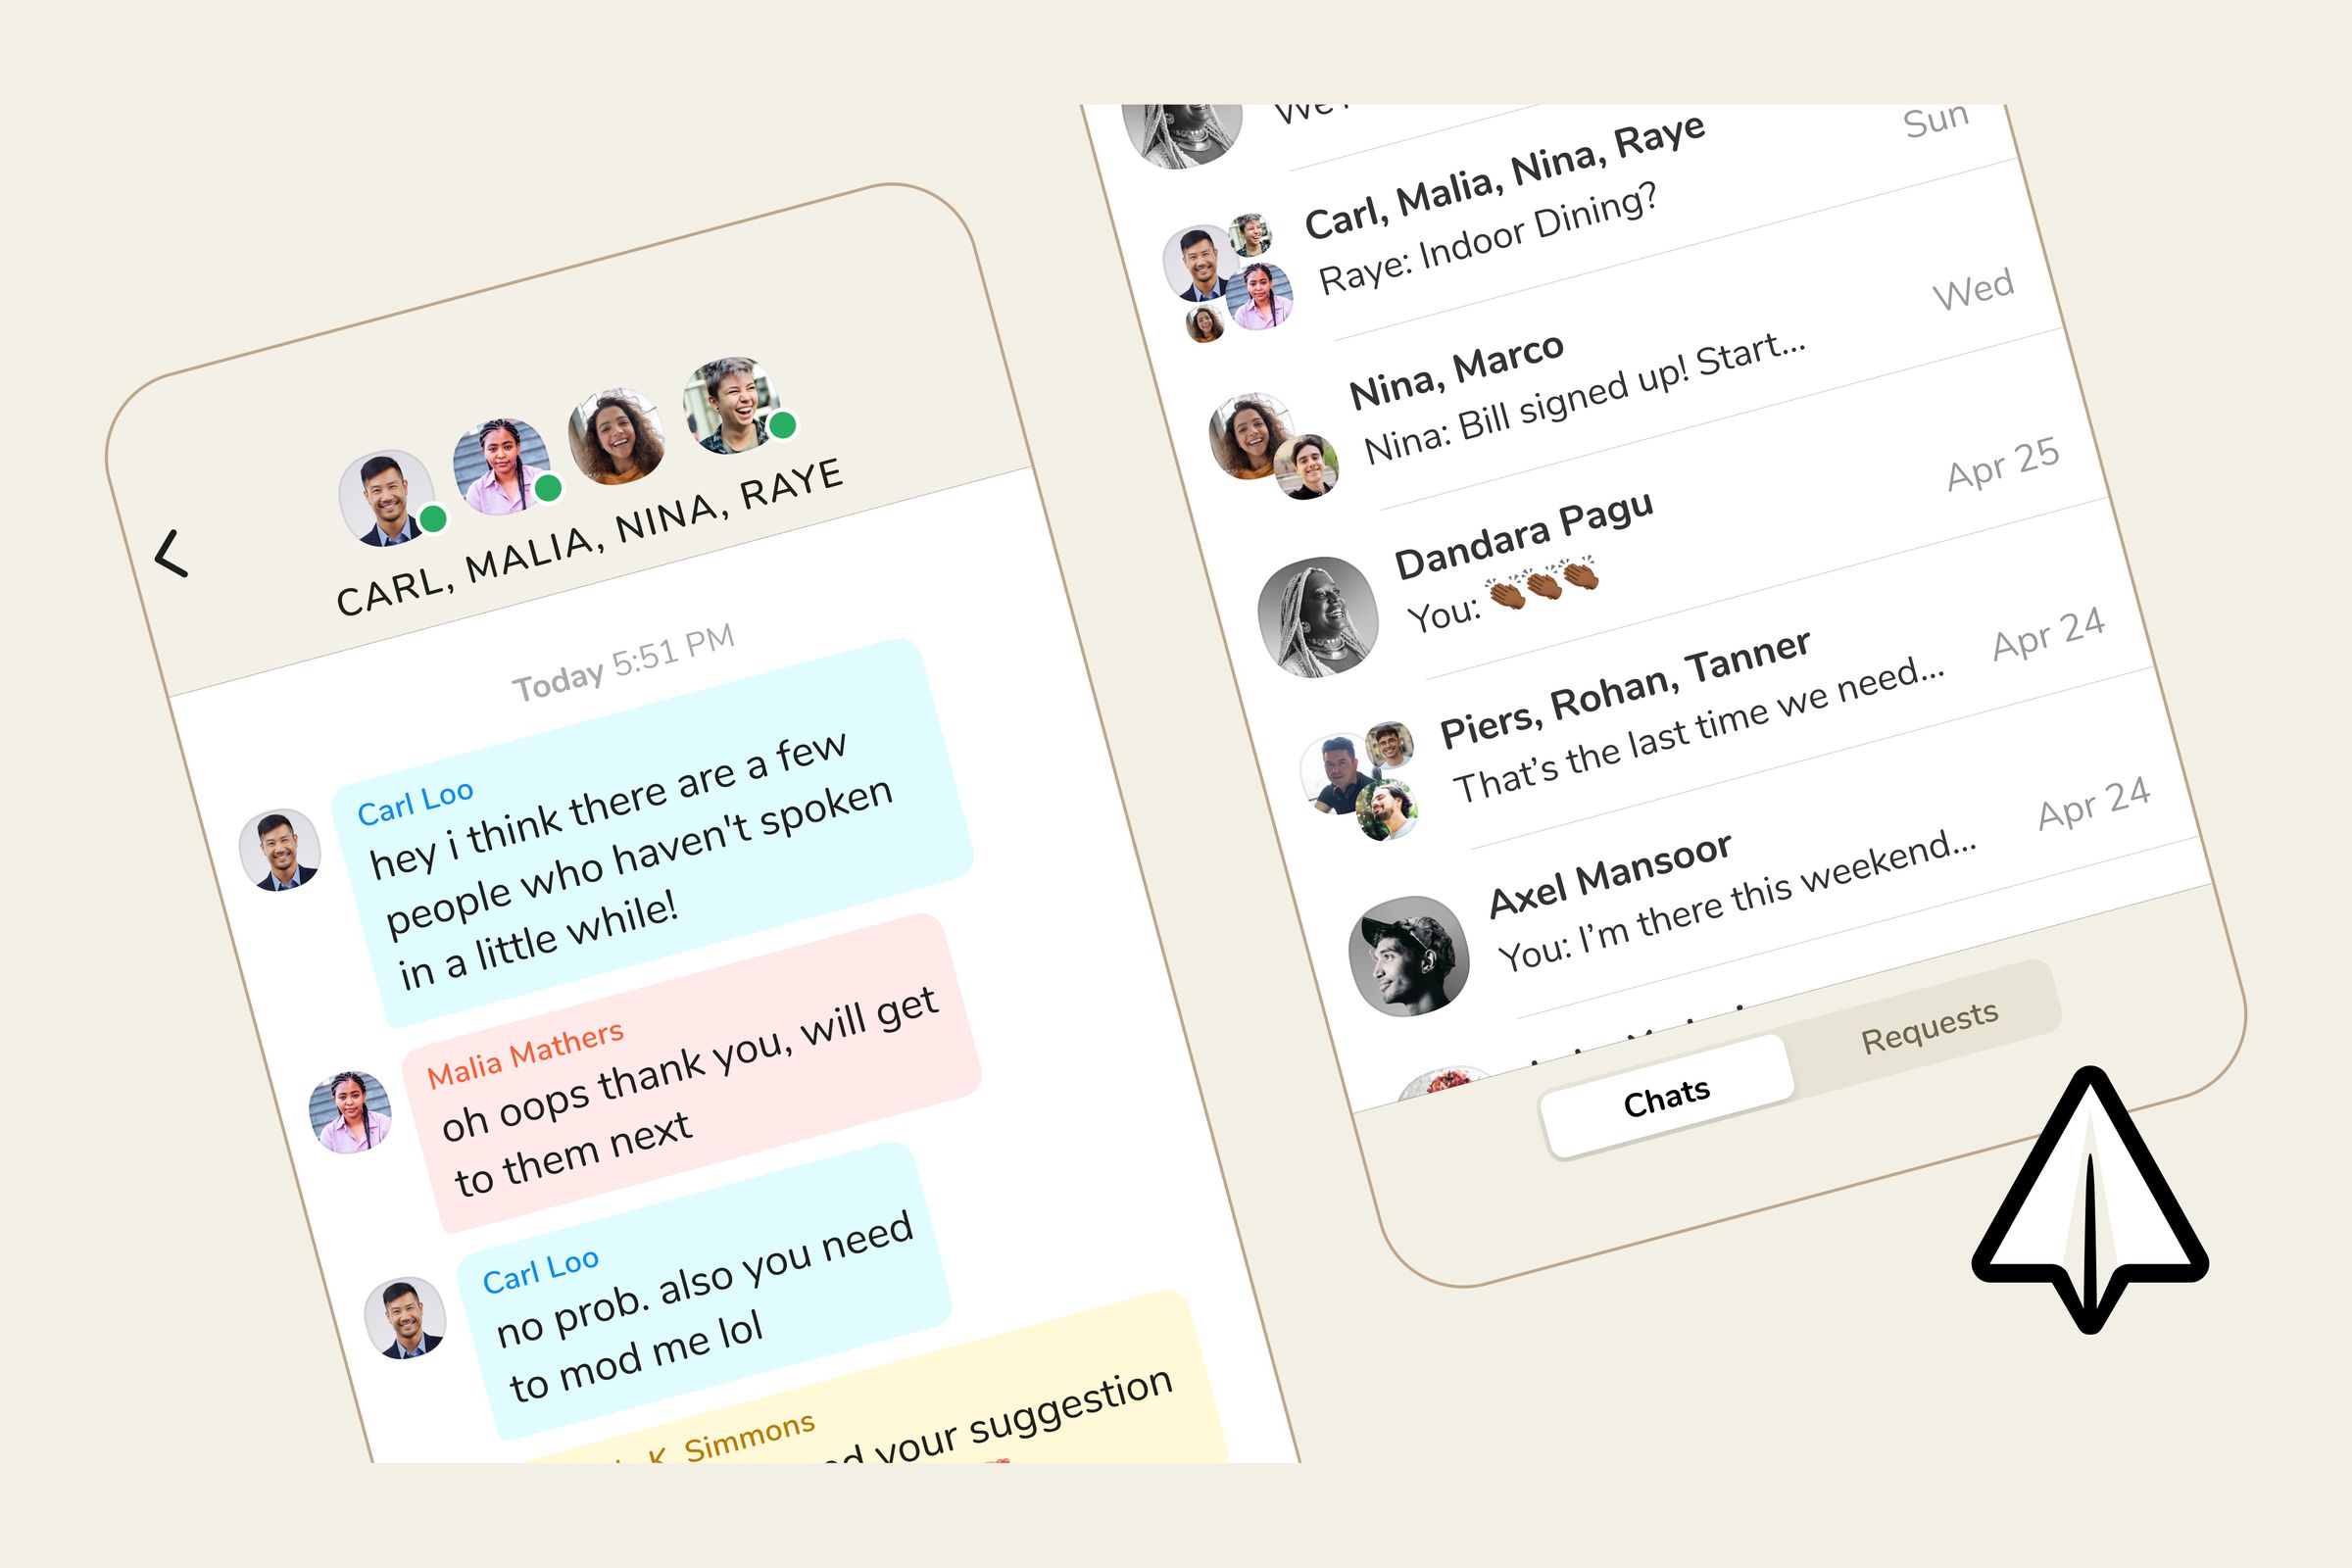 Backchannel, Clubhouse’s messaging feature